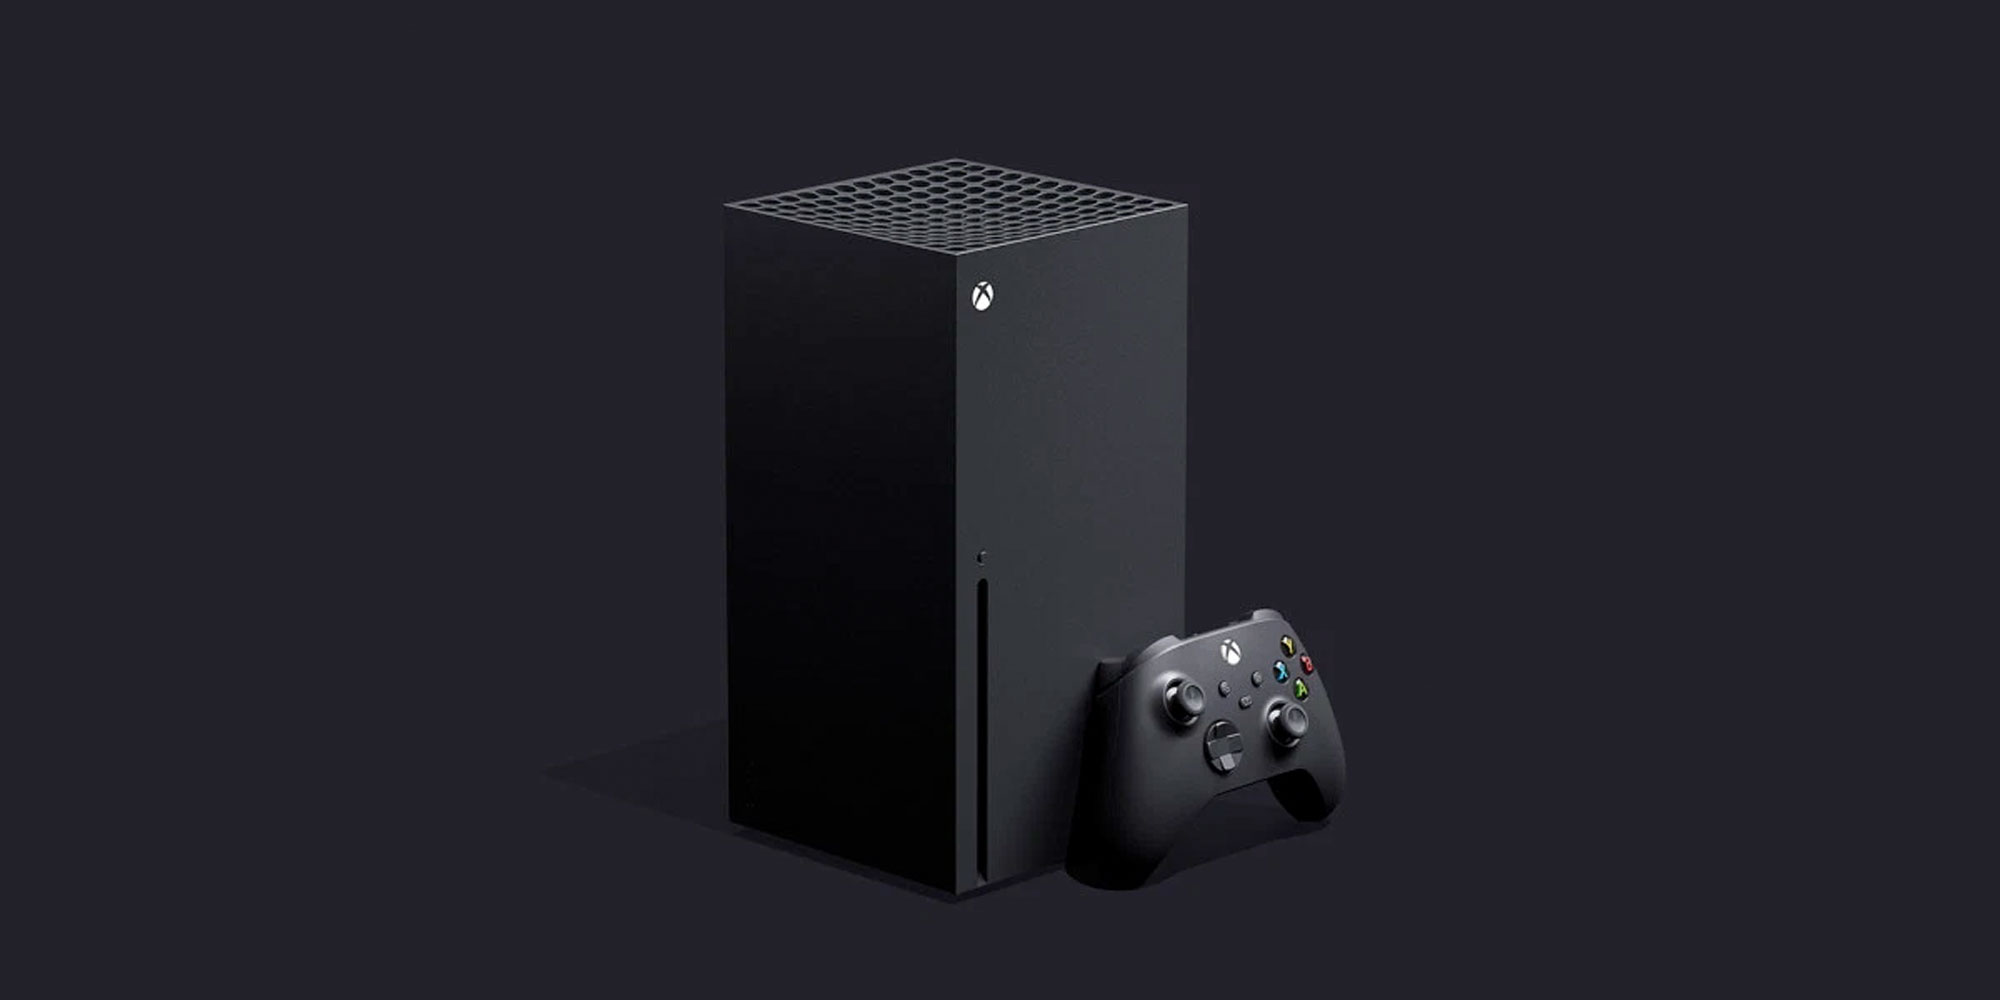 Xbox Series X Console with Avatar Game, Accesso ries & Voucher